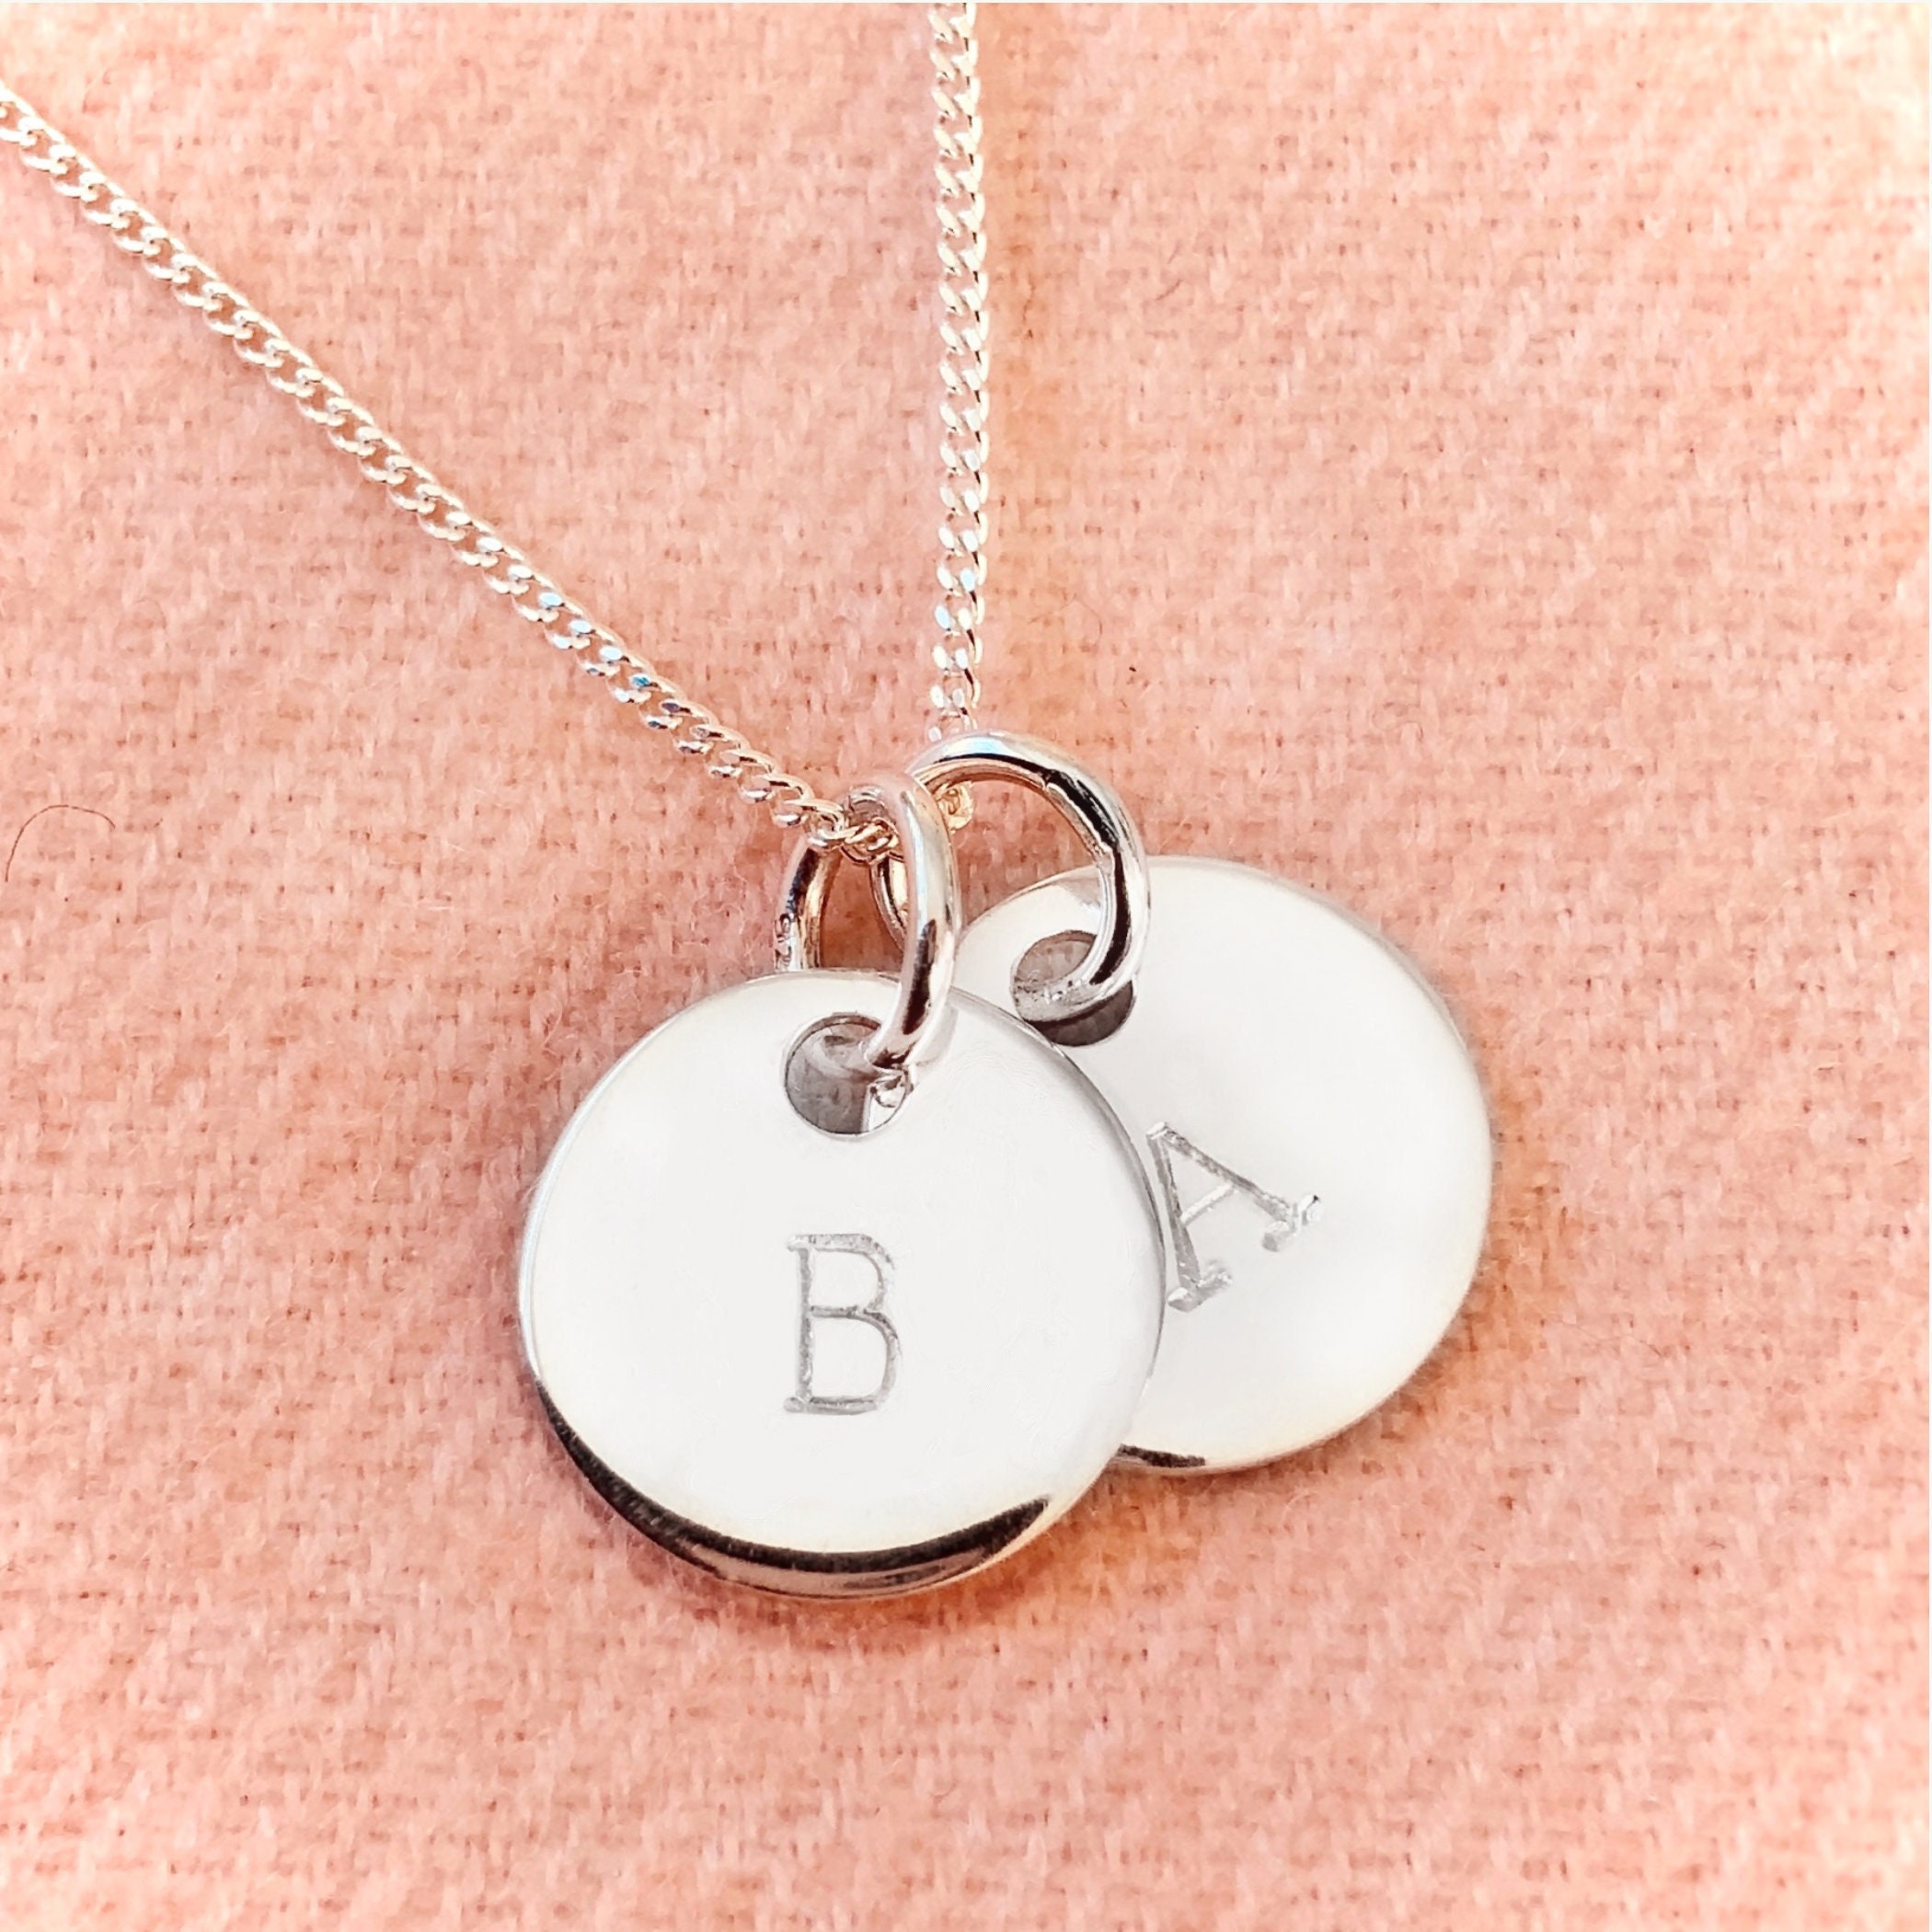 sterling Silver Initials Necklace // Name Date Customised Personalised Disc Circle Pendant Ldr Girlfriend Wife Gift